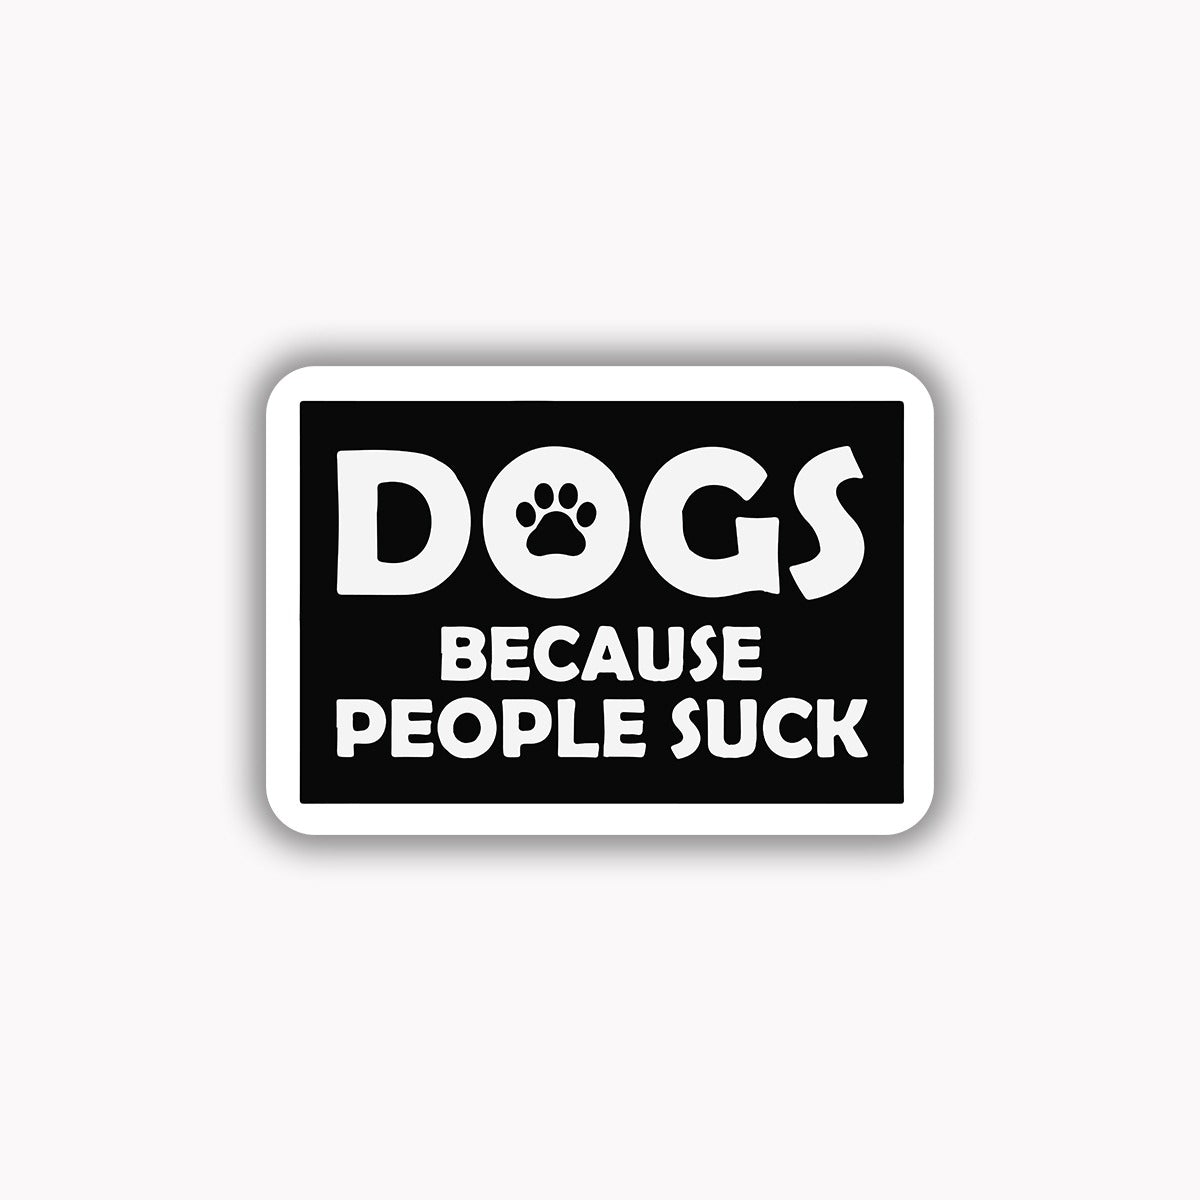 Dogs because people suck